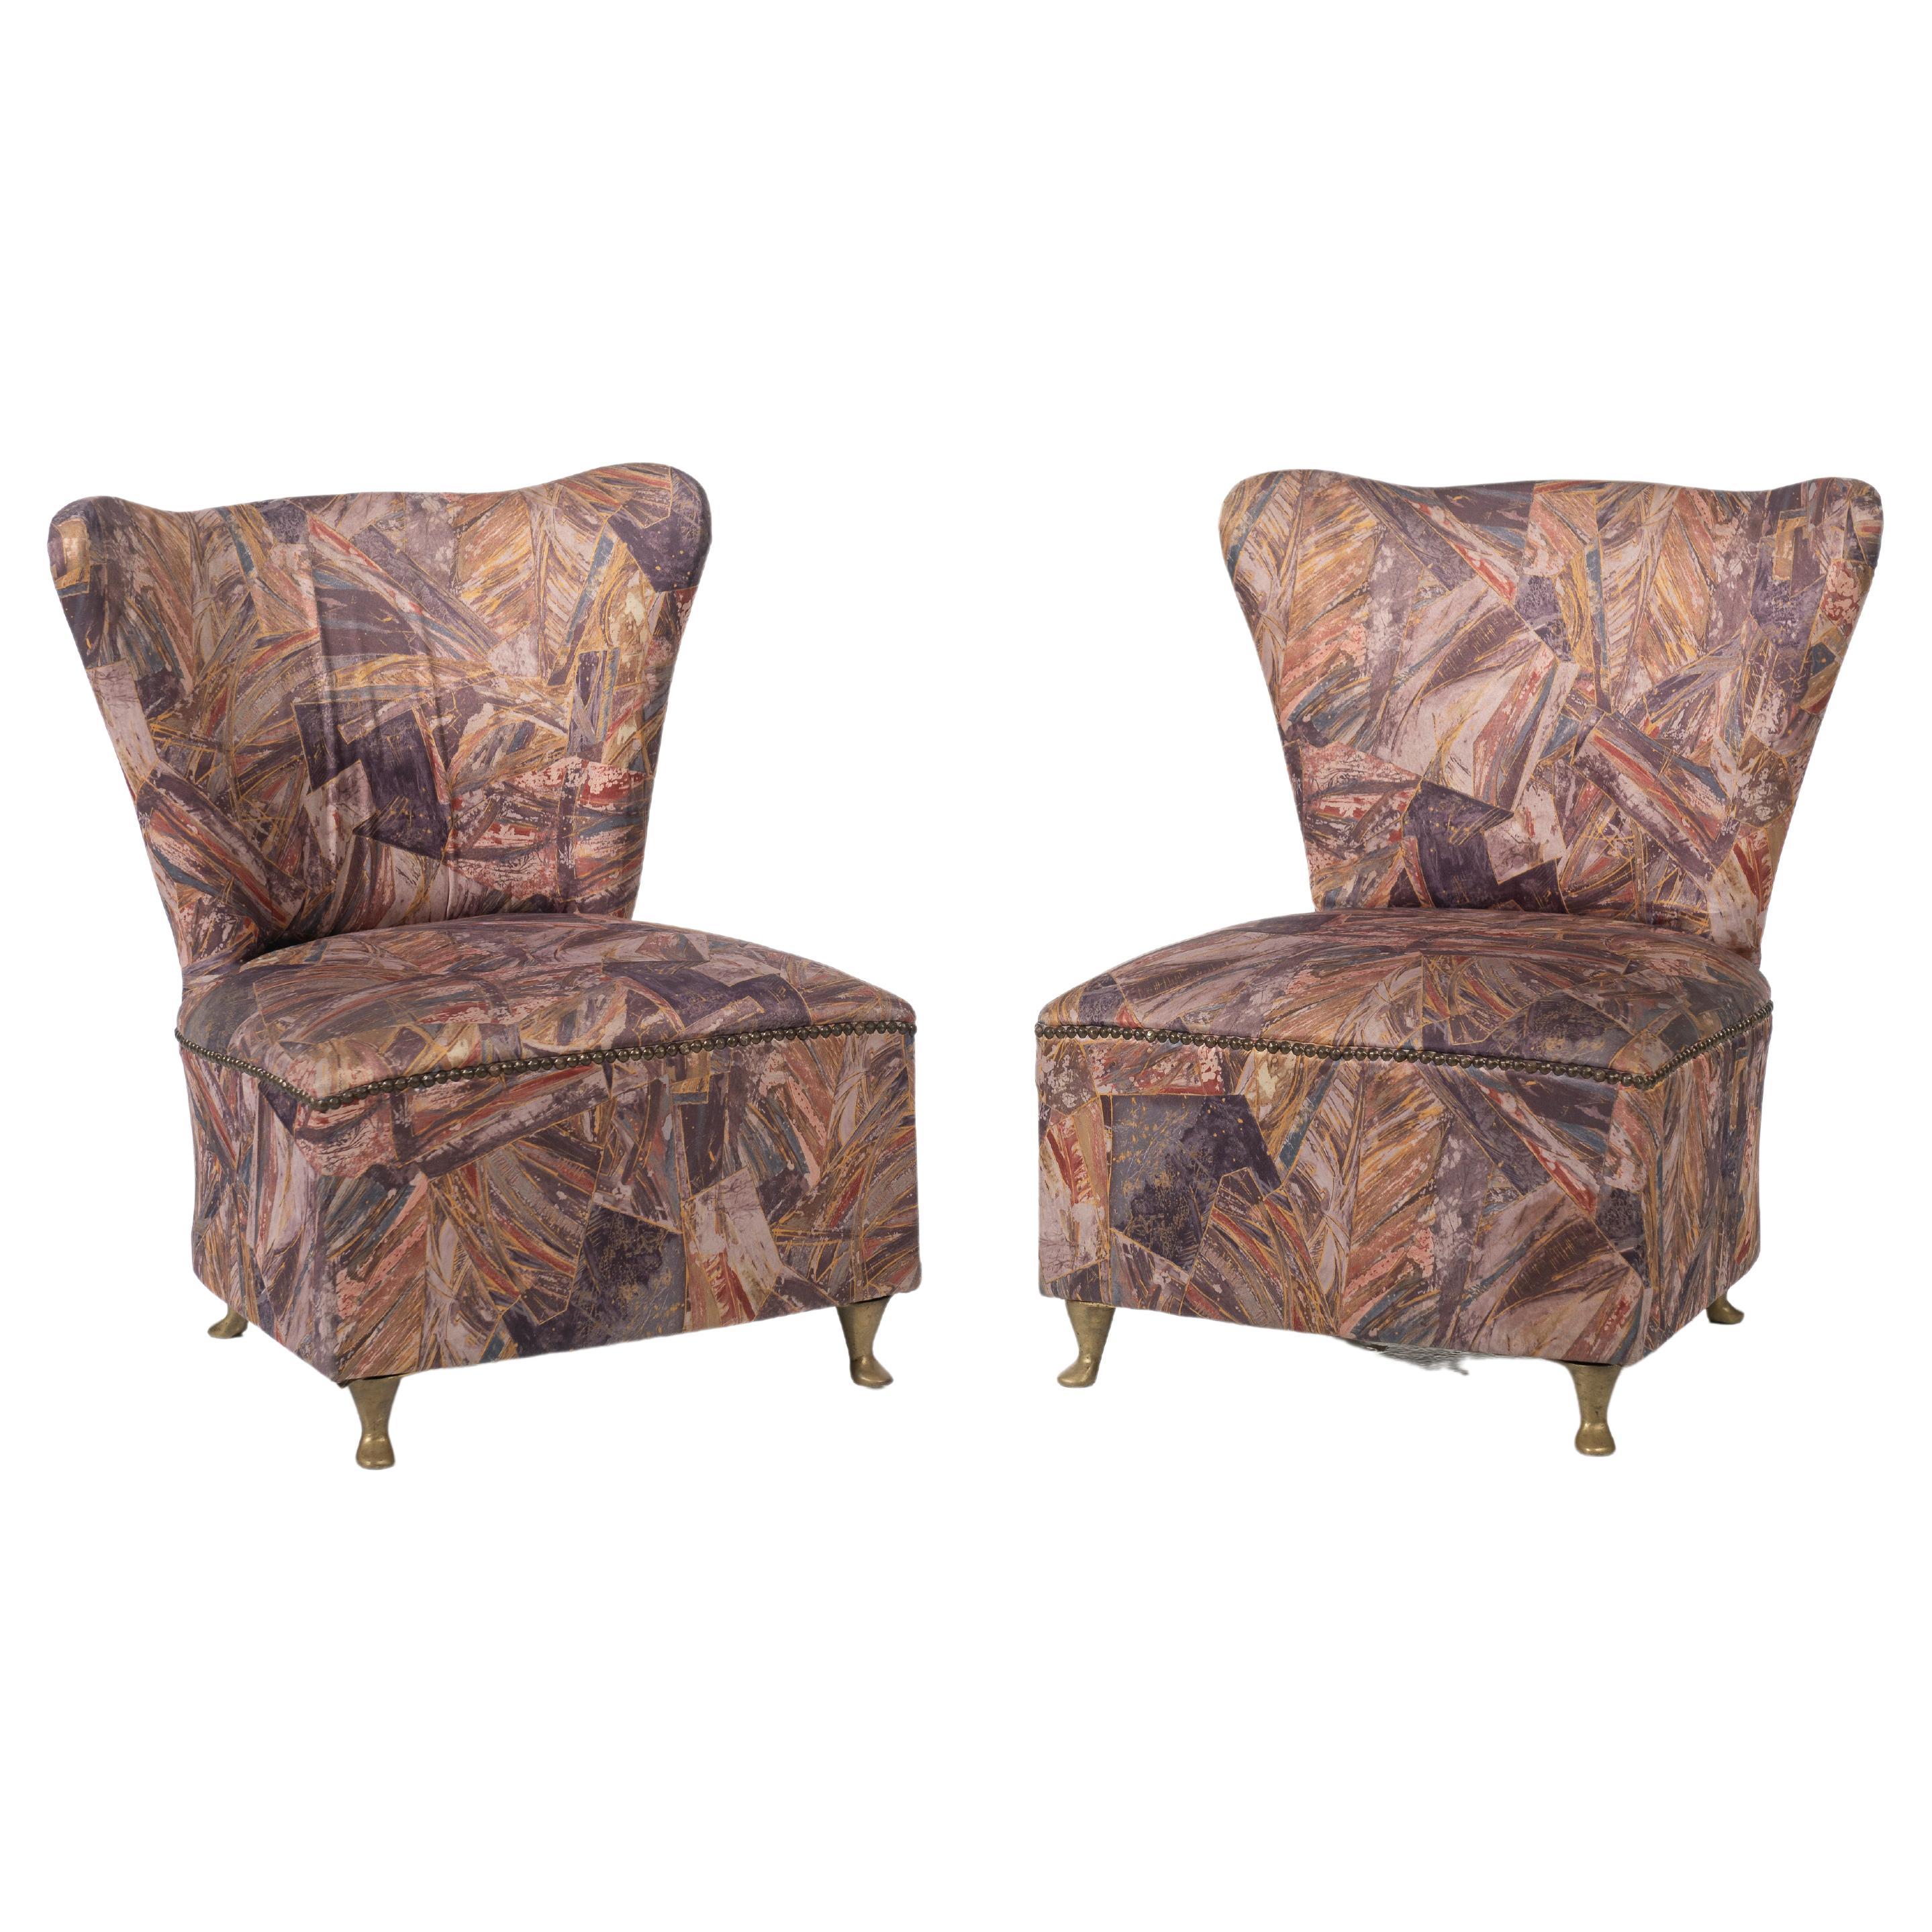 Pair of Vintage Italian Slipper Chairs Upholstered in Fabric with Brass Feet